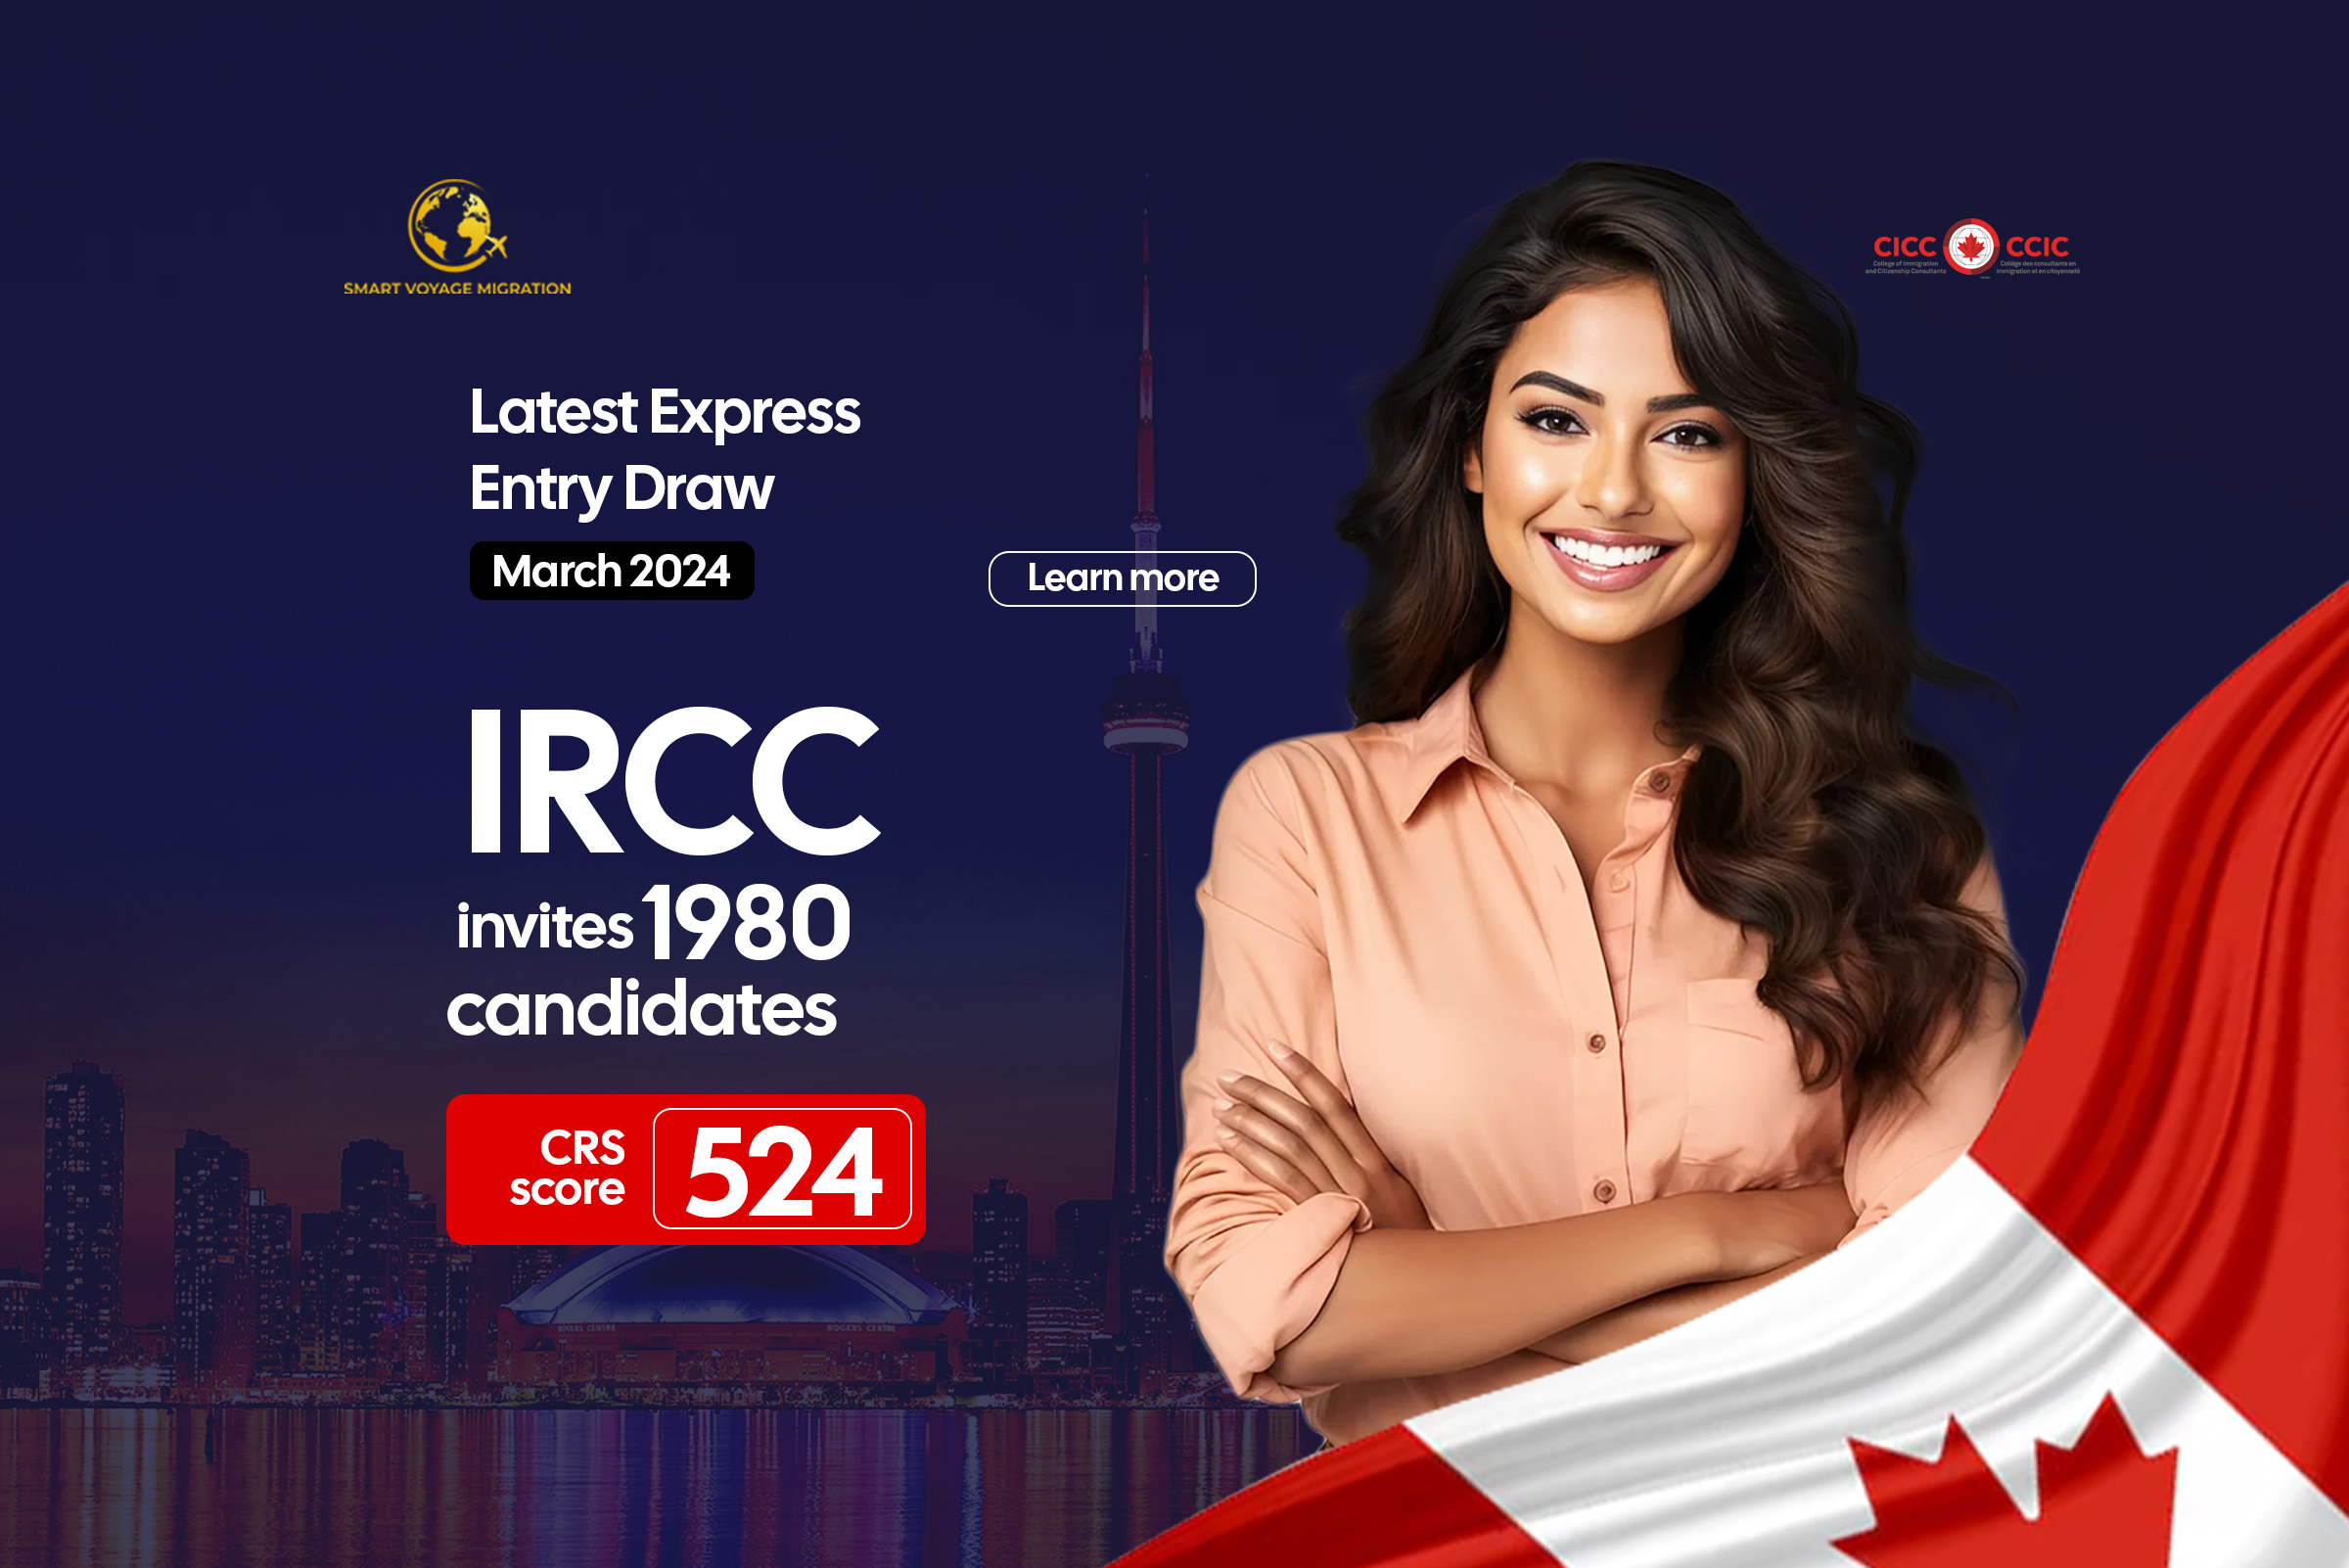 IRCC Invites 1,980 Candidates In Latest Express Entry Draw March 25th 2024